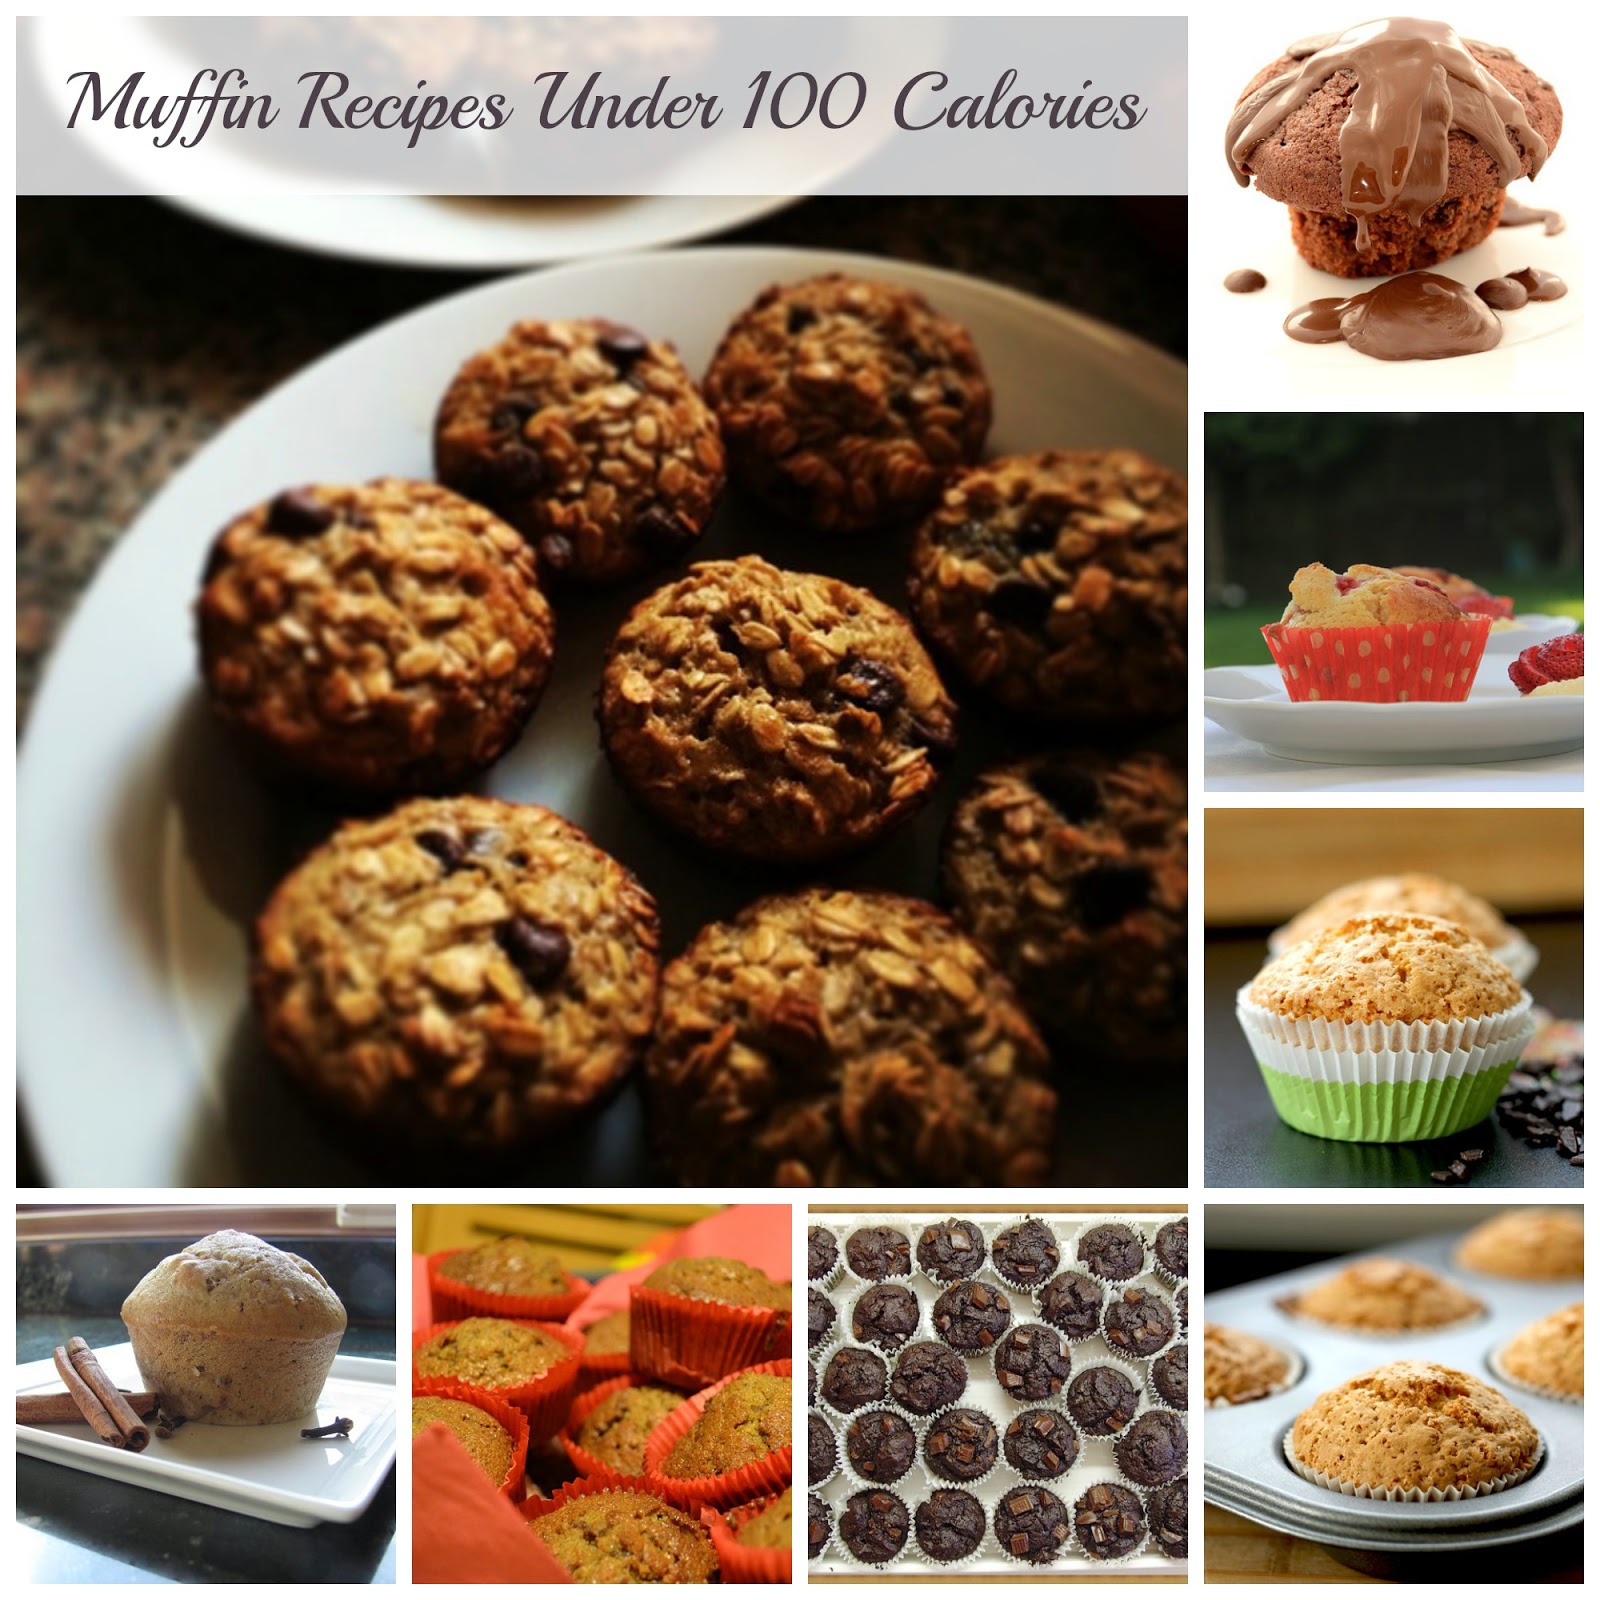 30 Muffin Recipes Under 100 Calories | Becky Cooks Lightly #Healthy